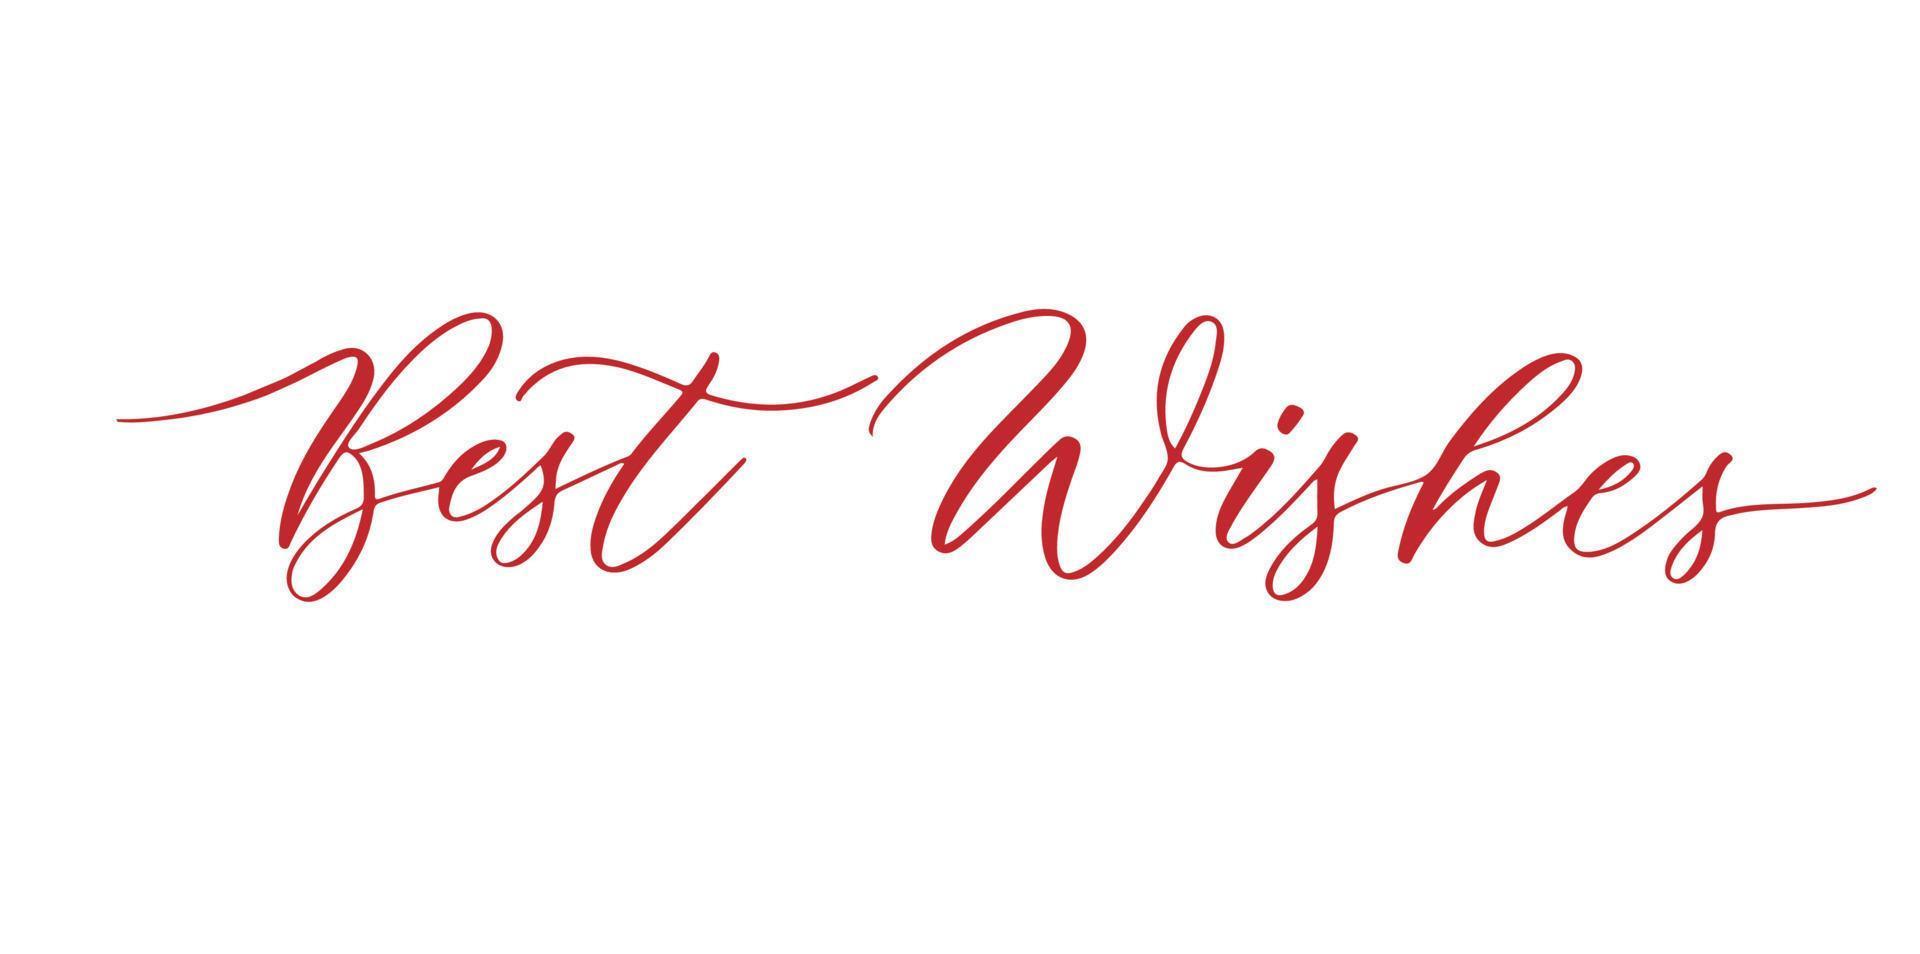 Best wishes - hand lettering inscription to winter holiday design, black and white ink calligraphy. vector